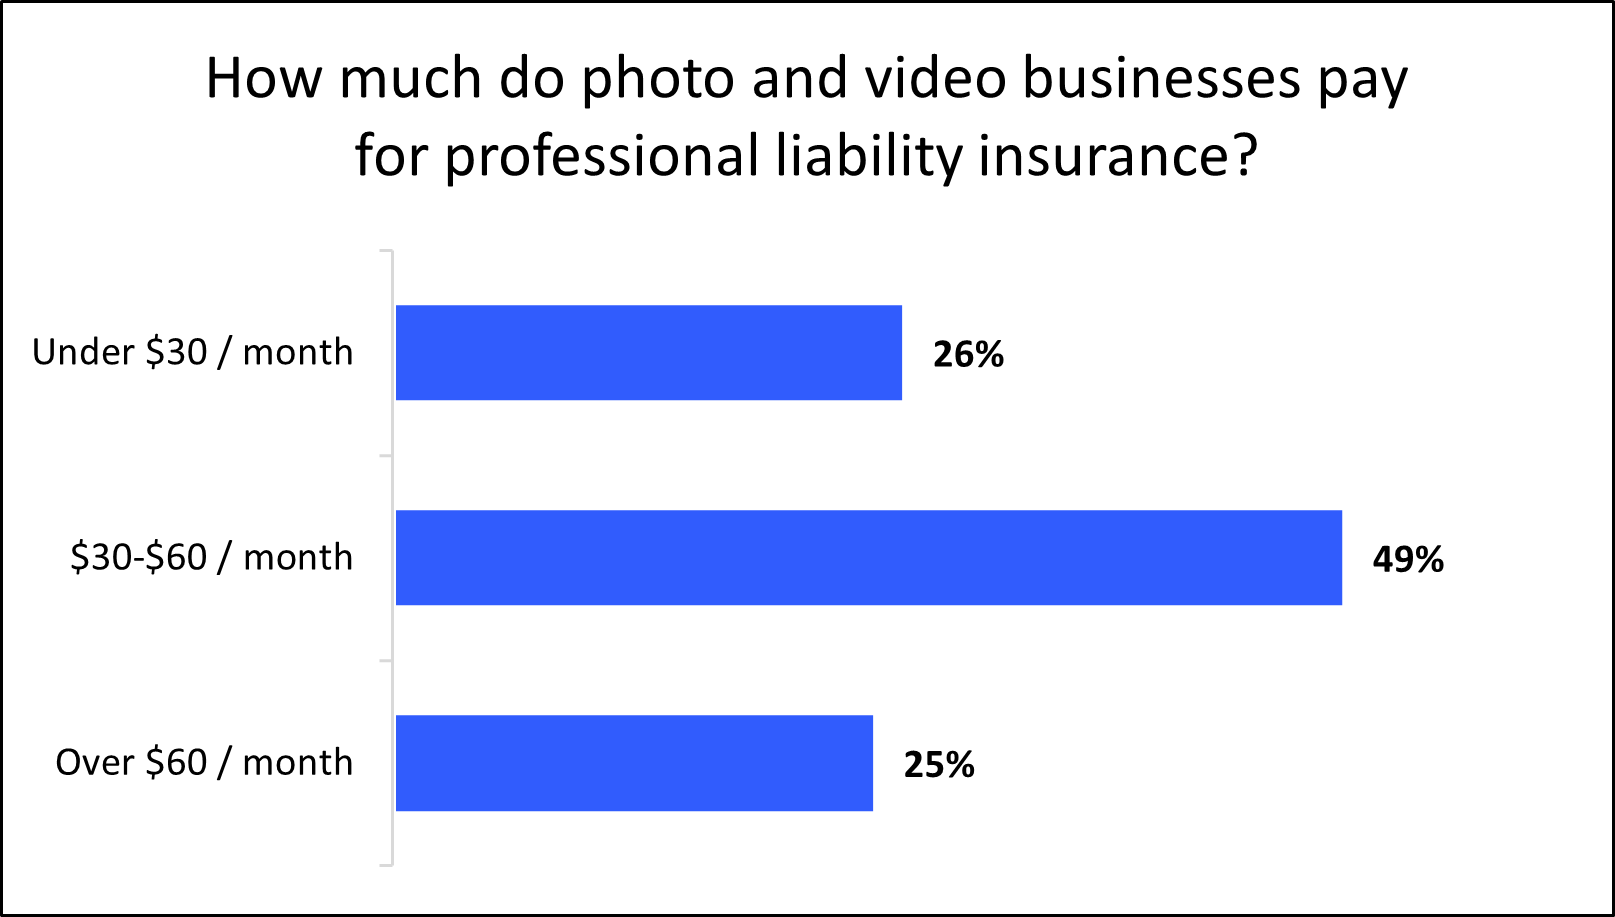 Chart: How much do photo and video businesses pay for professional liability insurance?